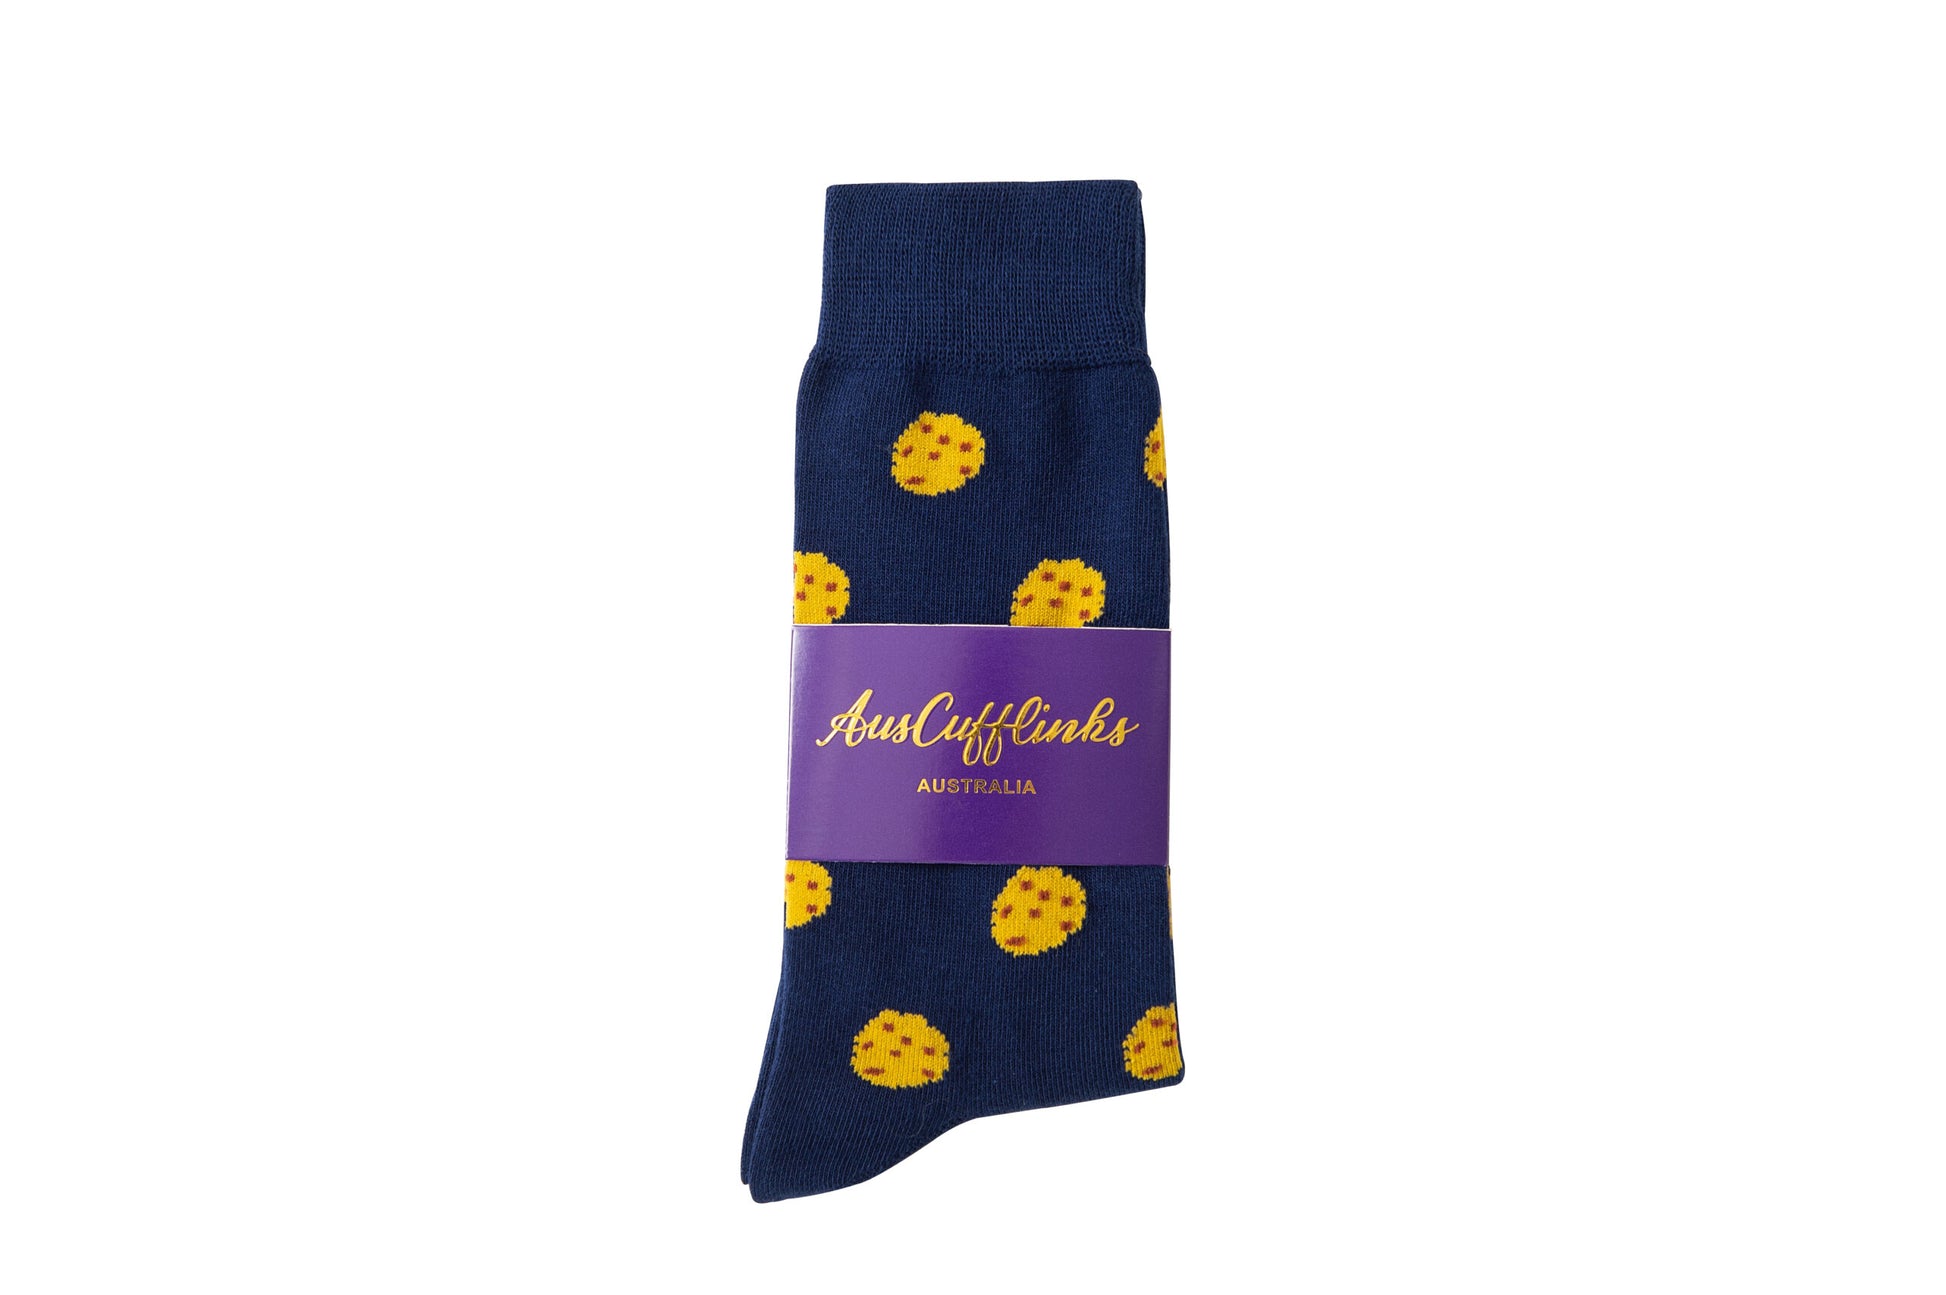 A Cookie Socks with a yellow flower on it.